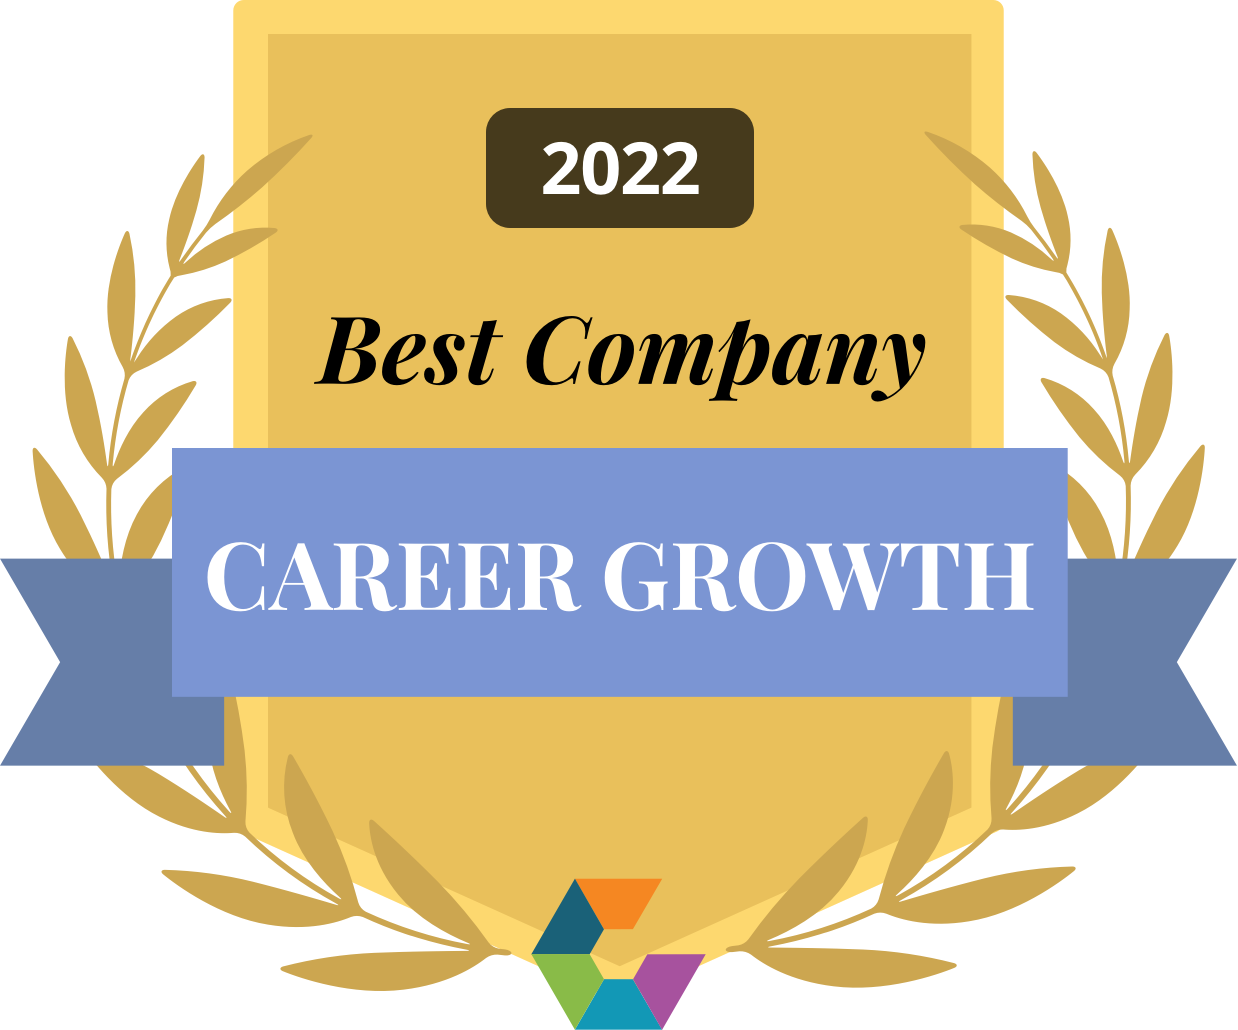 2022 Best Company for Career Growth by Comparably